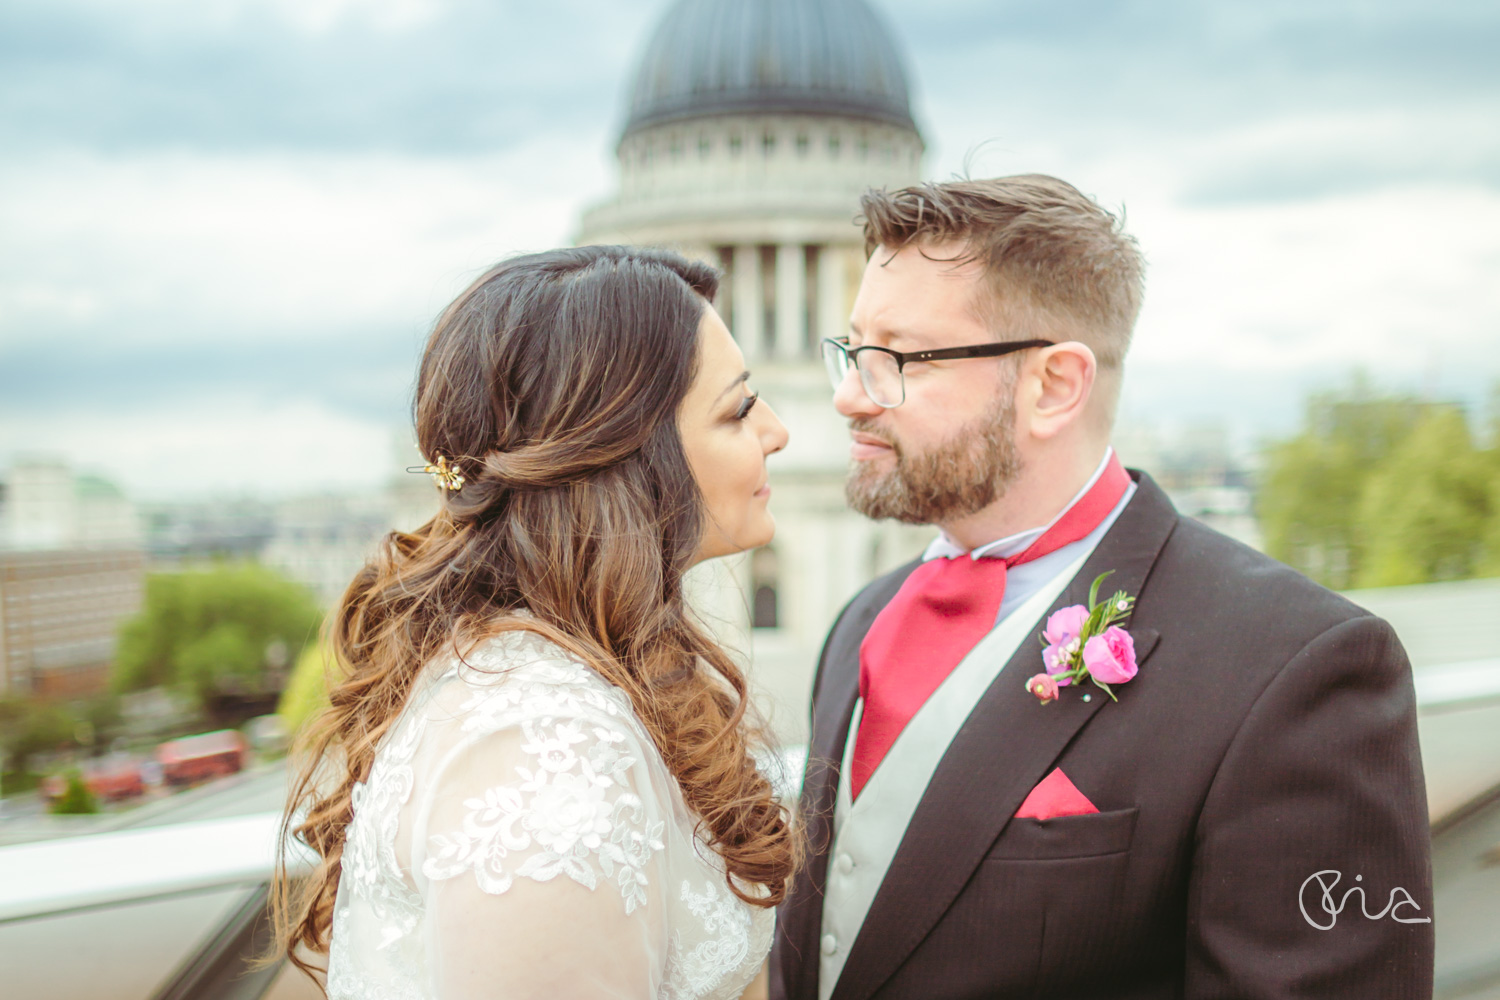 Bride and groom at St Paul's Cathedral wedding in London